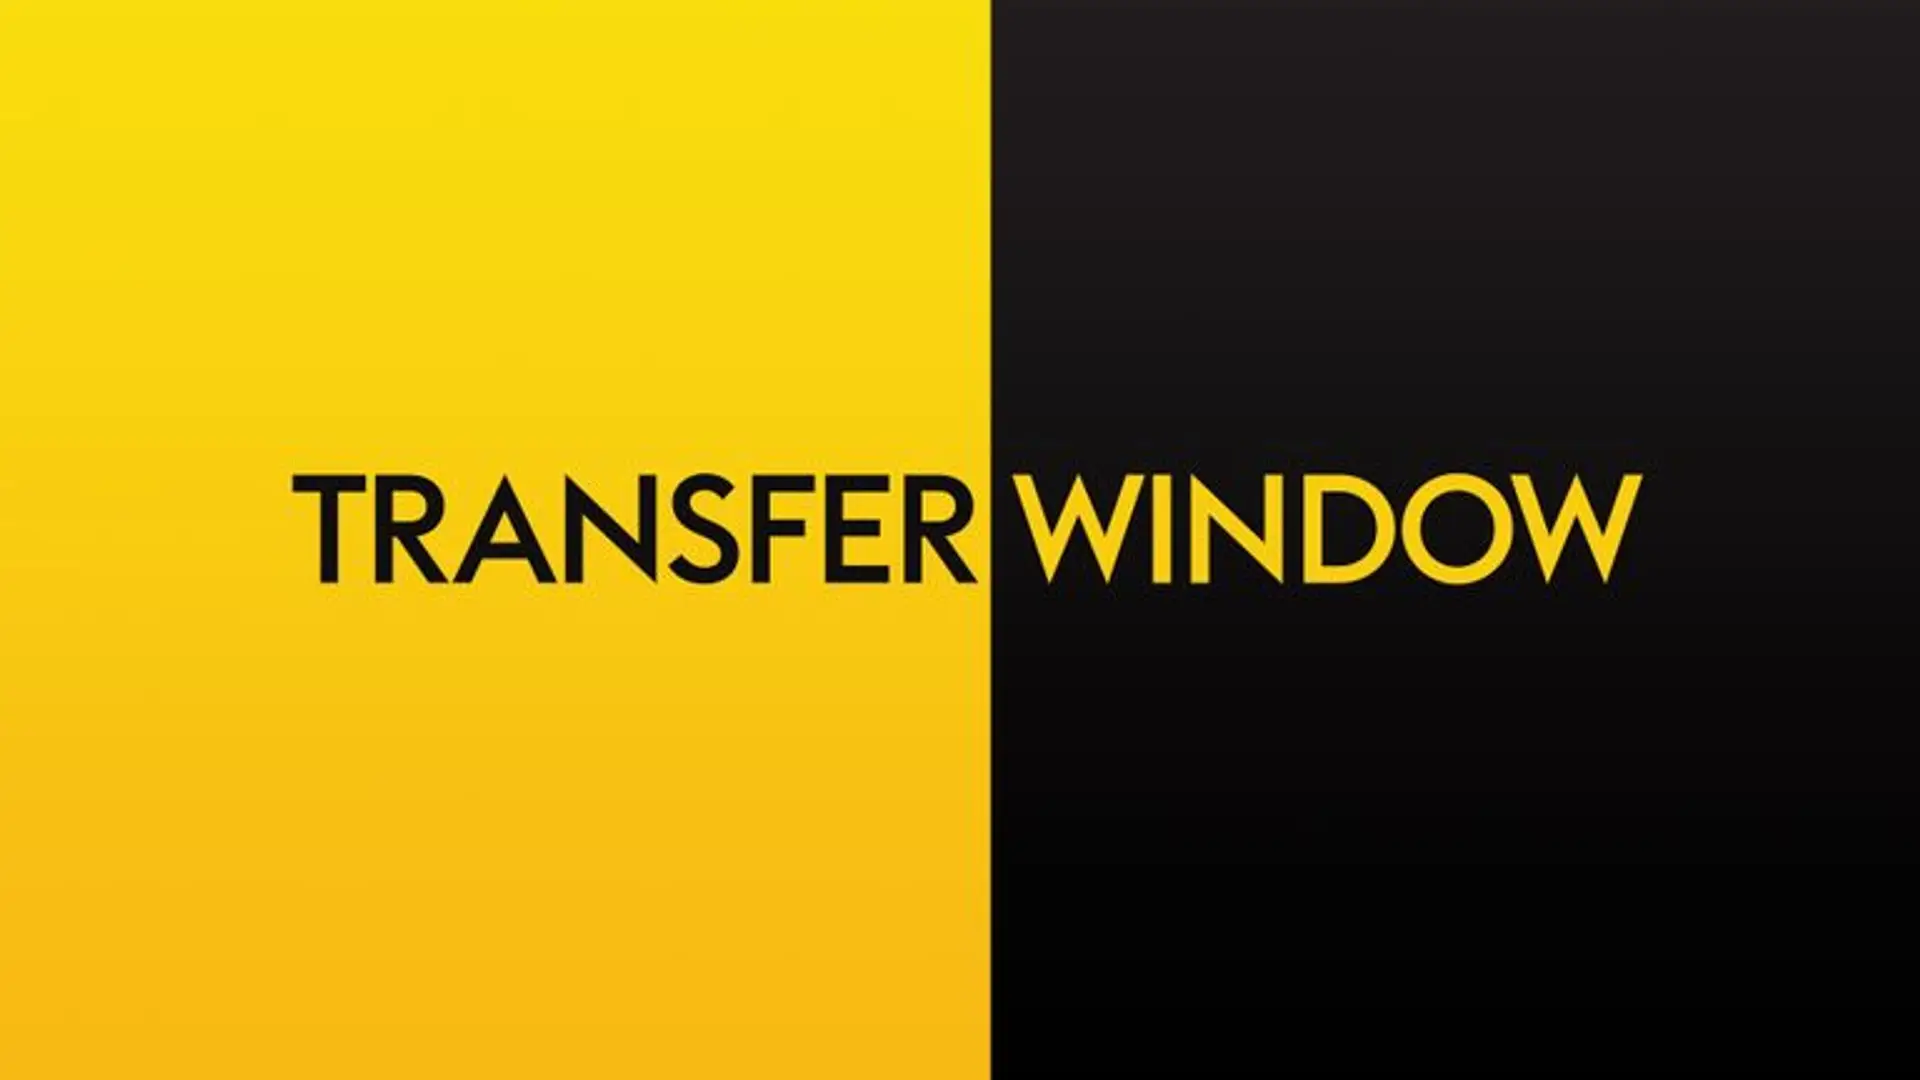 39 days to the start of the January 2021 Transfer Window! 🔜✍📝⚽️